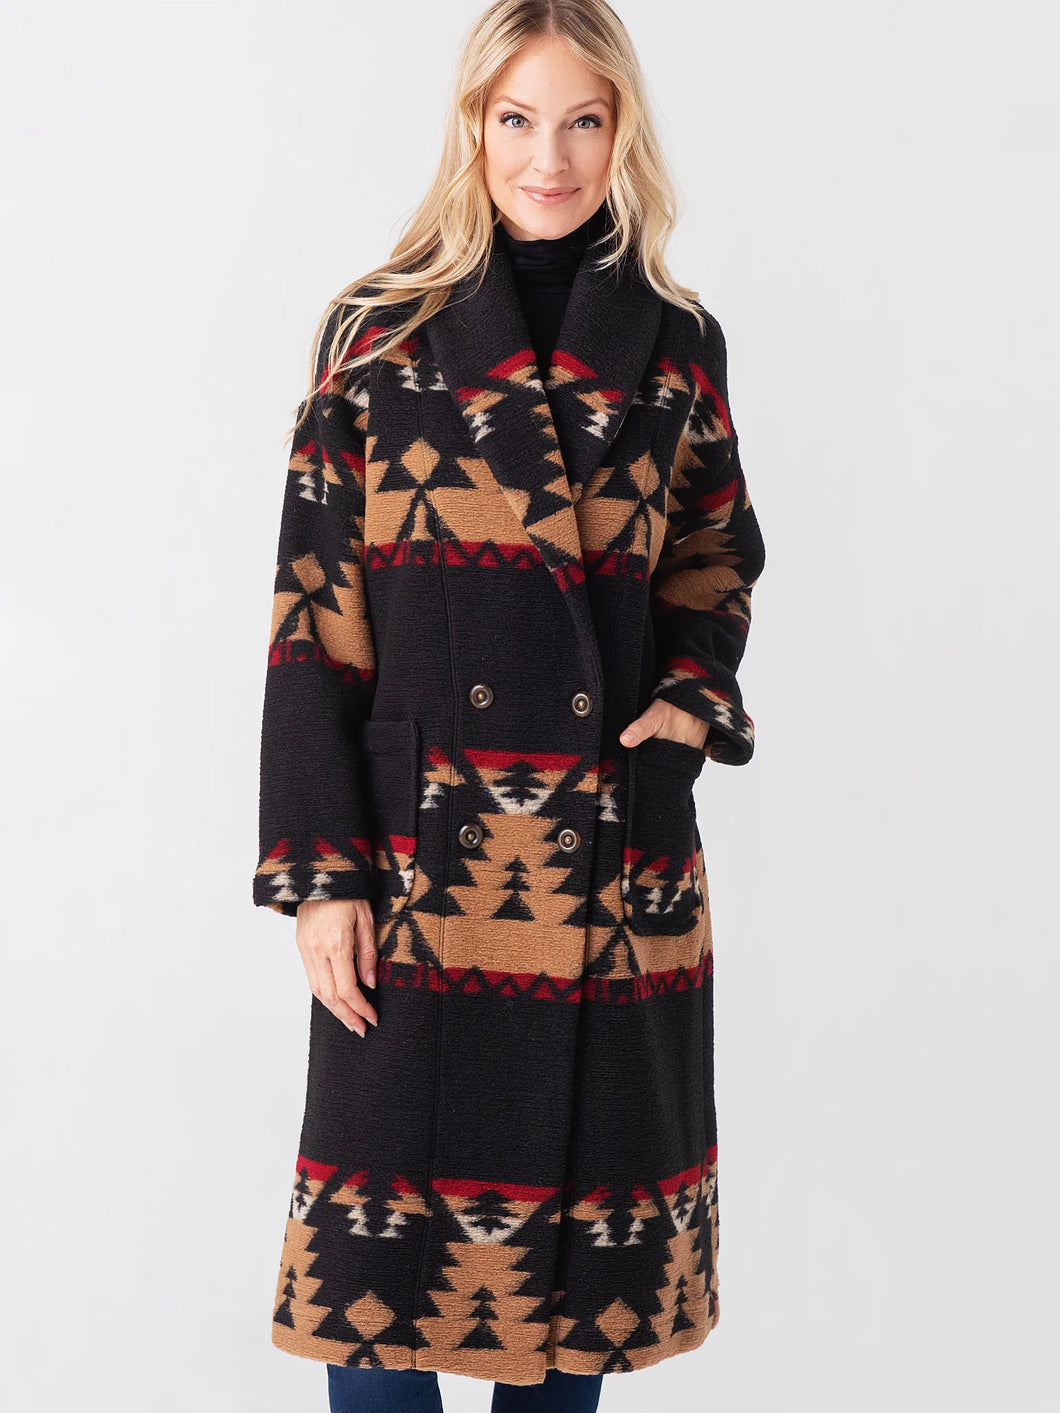 Yellowstone S05 Kelly Reilly Black Printed Wool Coat